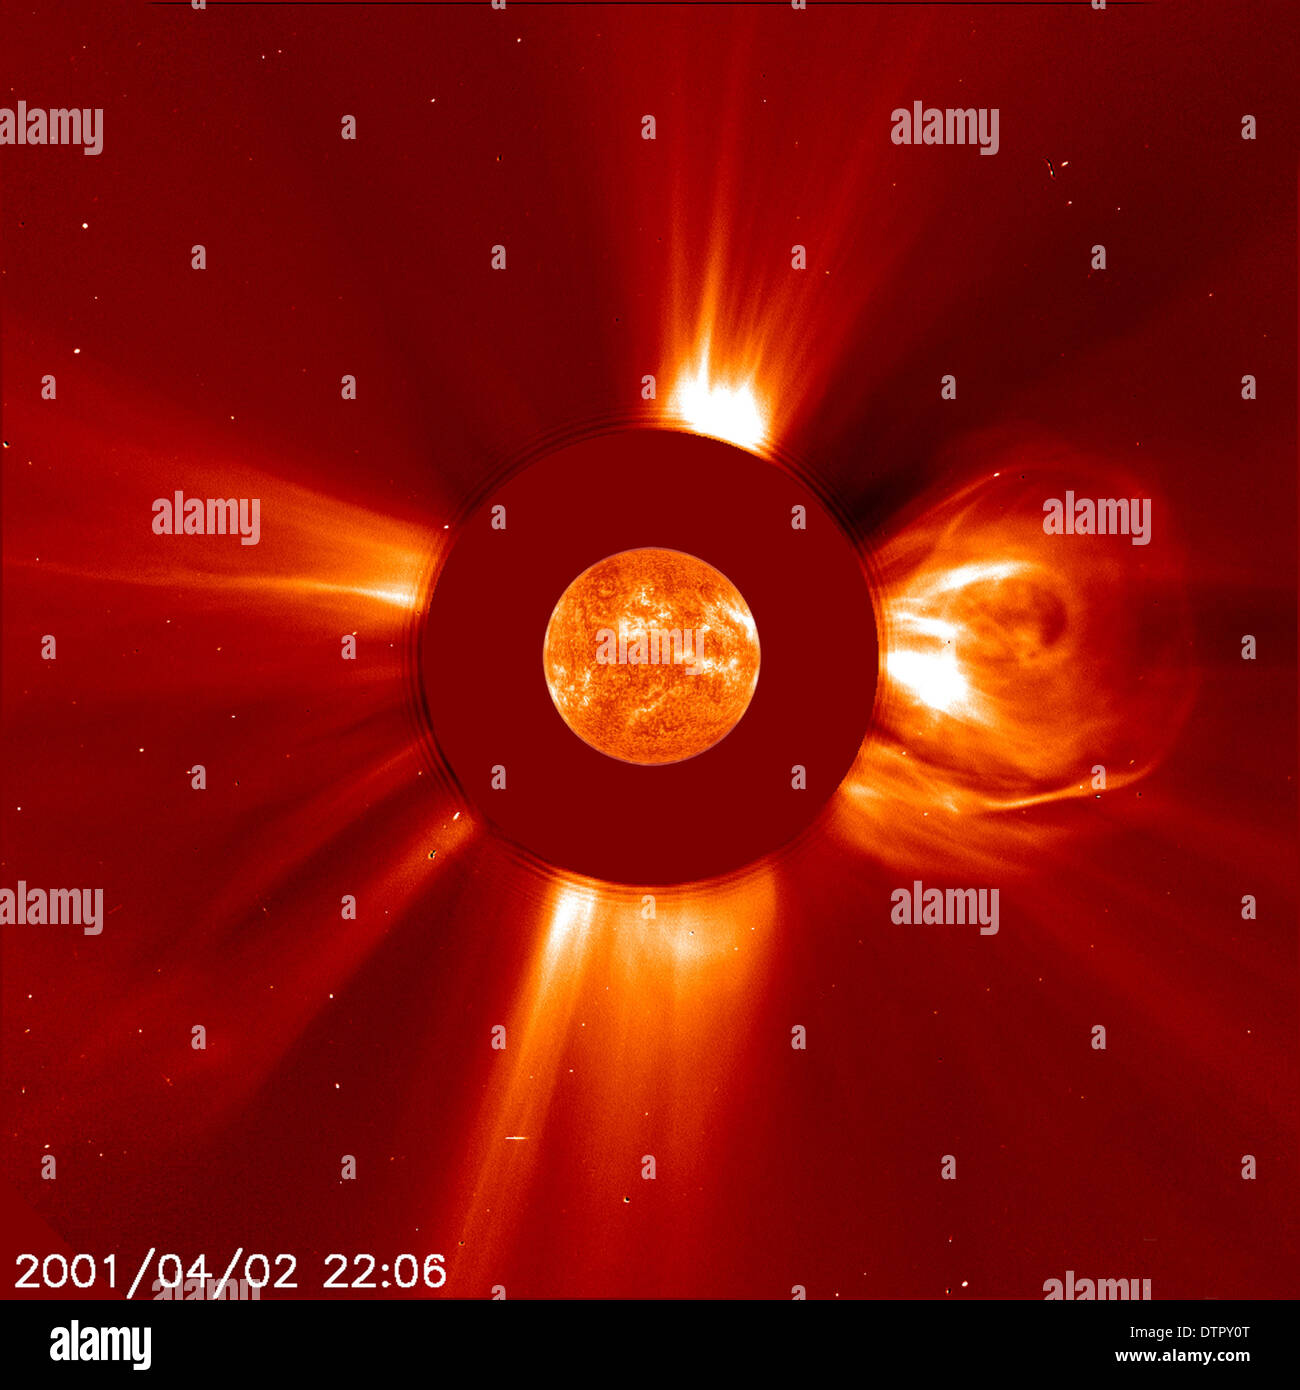 The sun unleashed the biggest solar flare ever recorded, as observed by the Solar and Heliospheric Observatory (SOHO) satellite. Stock Photo